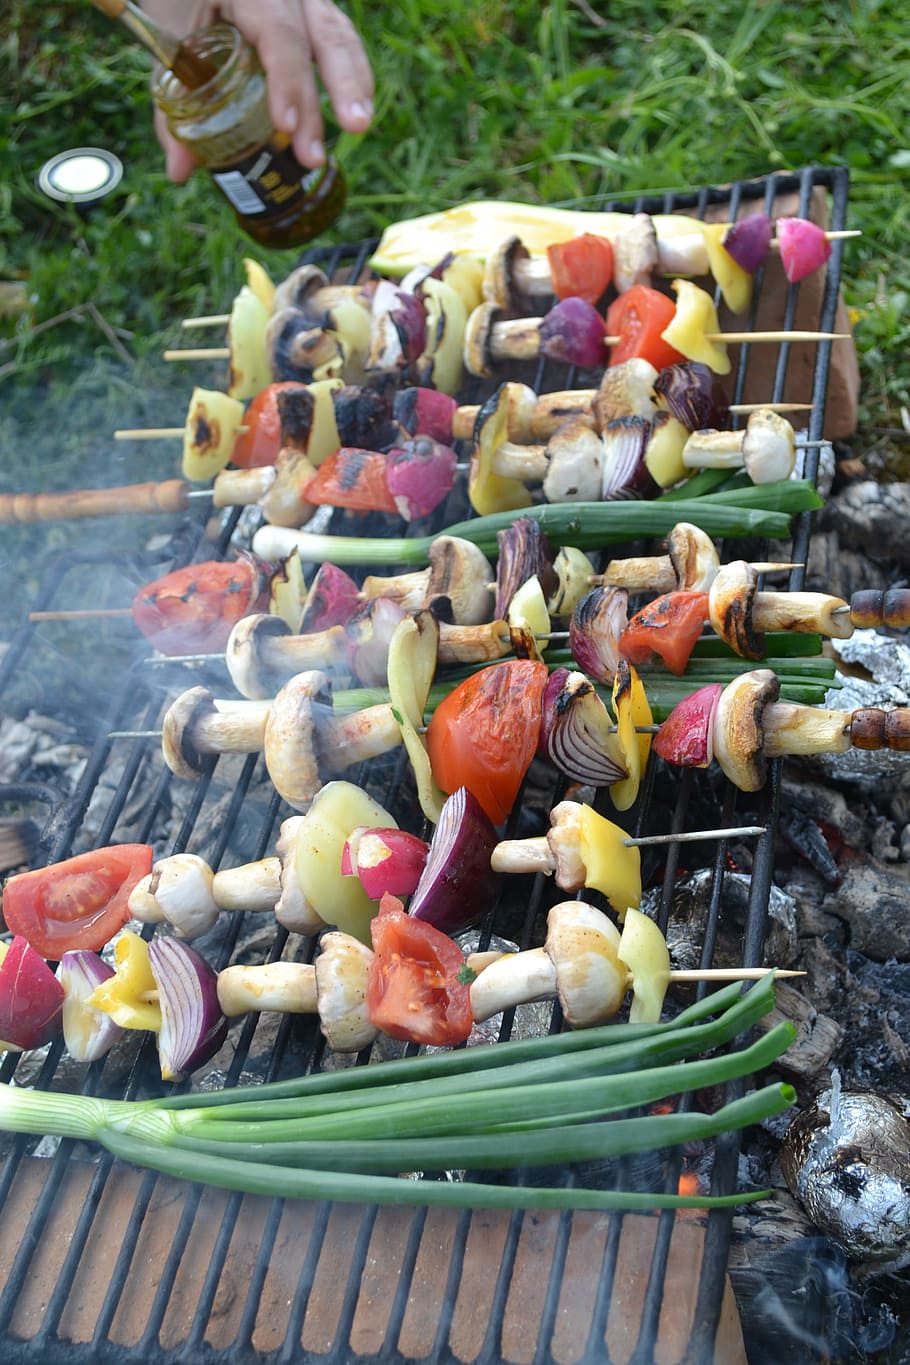 kebab barbecue, Vegan, Barbeque, Barbecue, Food, Bbq, summer, grill, healthy, vegetarian